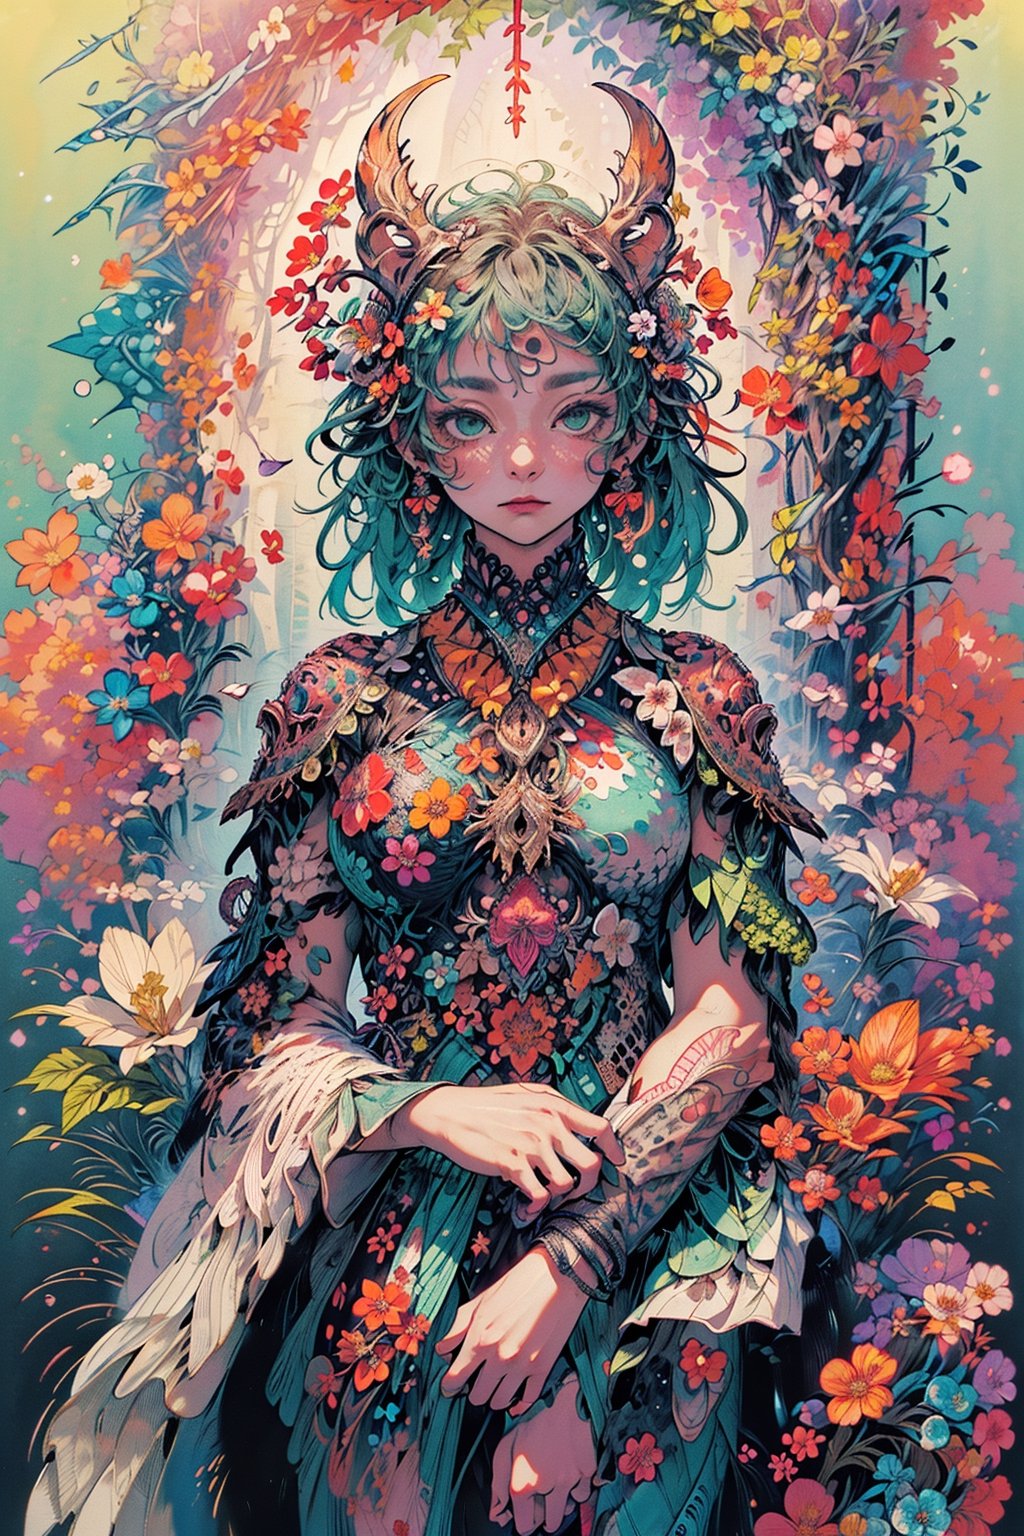 high resolution,  ultra detailed,  (masterpiece:1.4),  taeri,  busty,  super photo realistic illustration,  highres,  ultla detailed,  absurdres,  best quality,  woman,  flower dress,  colorful,  darl background,  flower armor,  green theme,  exposure blend,  medium shot,  bokeh,  (hdr:1.4),  high contrast,  (cinematic,  teal and orange:0.85),  (muted colors,  dim colors,  soothing tones:1.3),  (god bless you:1.3), 
compassionate expression,  empathetic,  caring,  kind, 
content expression,  satisfied,  pleased,  gratified, 
thoughtful expression,  pensive,  reflective,  contemplative, 
determined expression,  resolute,  purposeful,  firm, 

(colorful:1.5),  glowing lights,  pillar of lights,  blooming light effect, 
papier colle,  paper collage,  layered compositions,  varied textures,  abstract designs,  artistic juxtapositions,  mixed-media approach, 
(Zentangle:1.5),  structured patterns,  meditative drawing,  intricate designs,  focus and relaxation,  creative doodling,  artistic expression